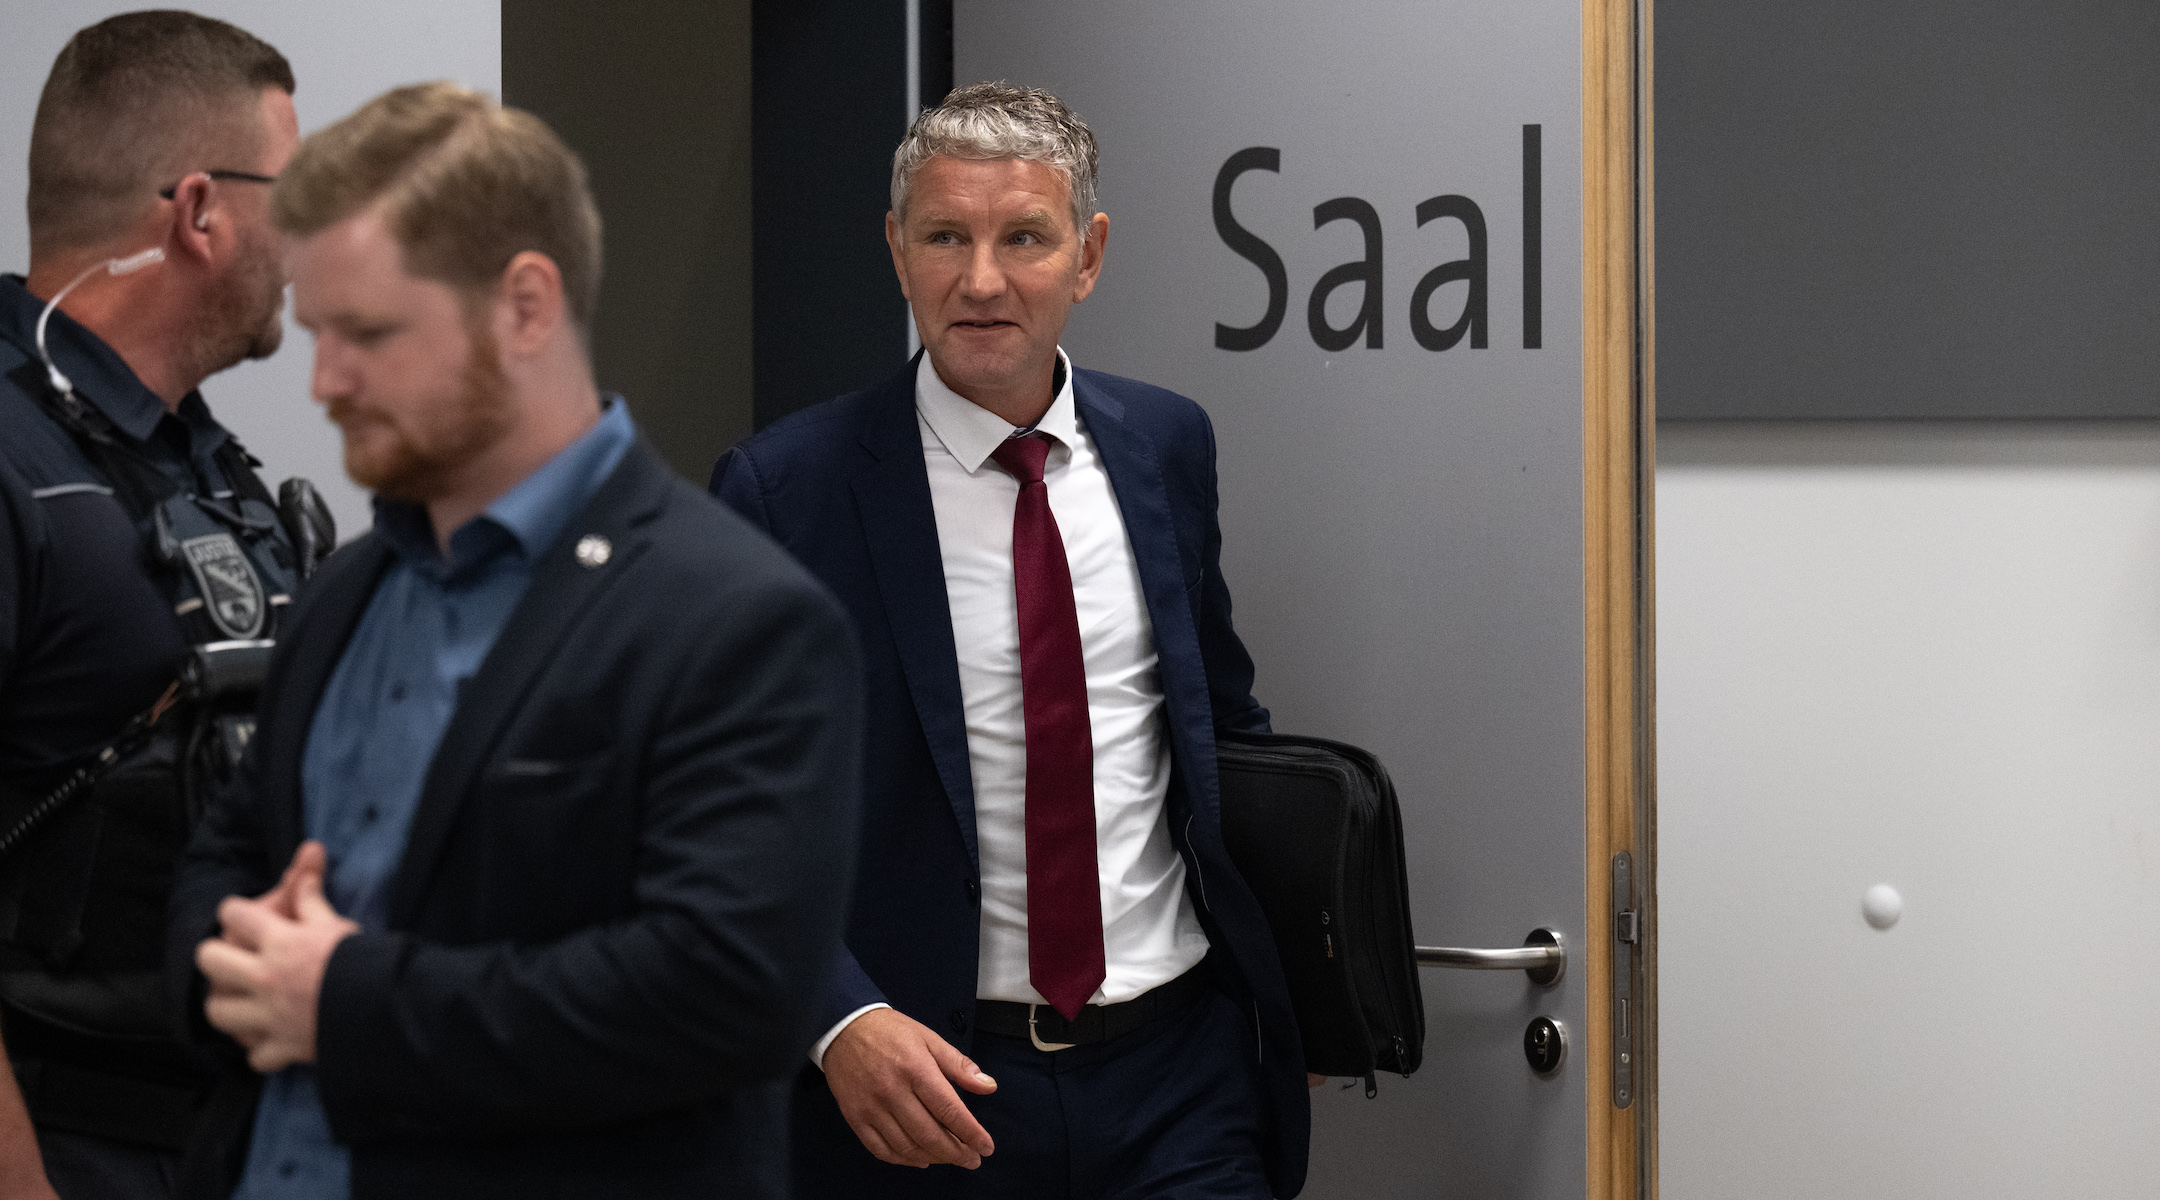 Björn Höcke, chairman of the Thuringian Alternative for Germany party, enters the courtroom in Halle/Saale, July 1, 2024. Höcke is once again on trial for using a banned Sturmabteilung (SA) slogan. In December 2023, Höcke is alleged to have uttered the first two words of the slogan “Alles für Deutschland” (Everything for Germany) as a speaker at an AfD event in Gera. (Photo by Hendrik Schmidt/picture alliance via Getty Images)